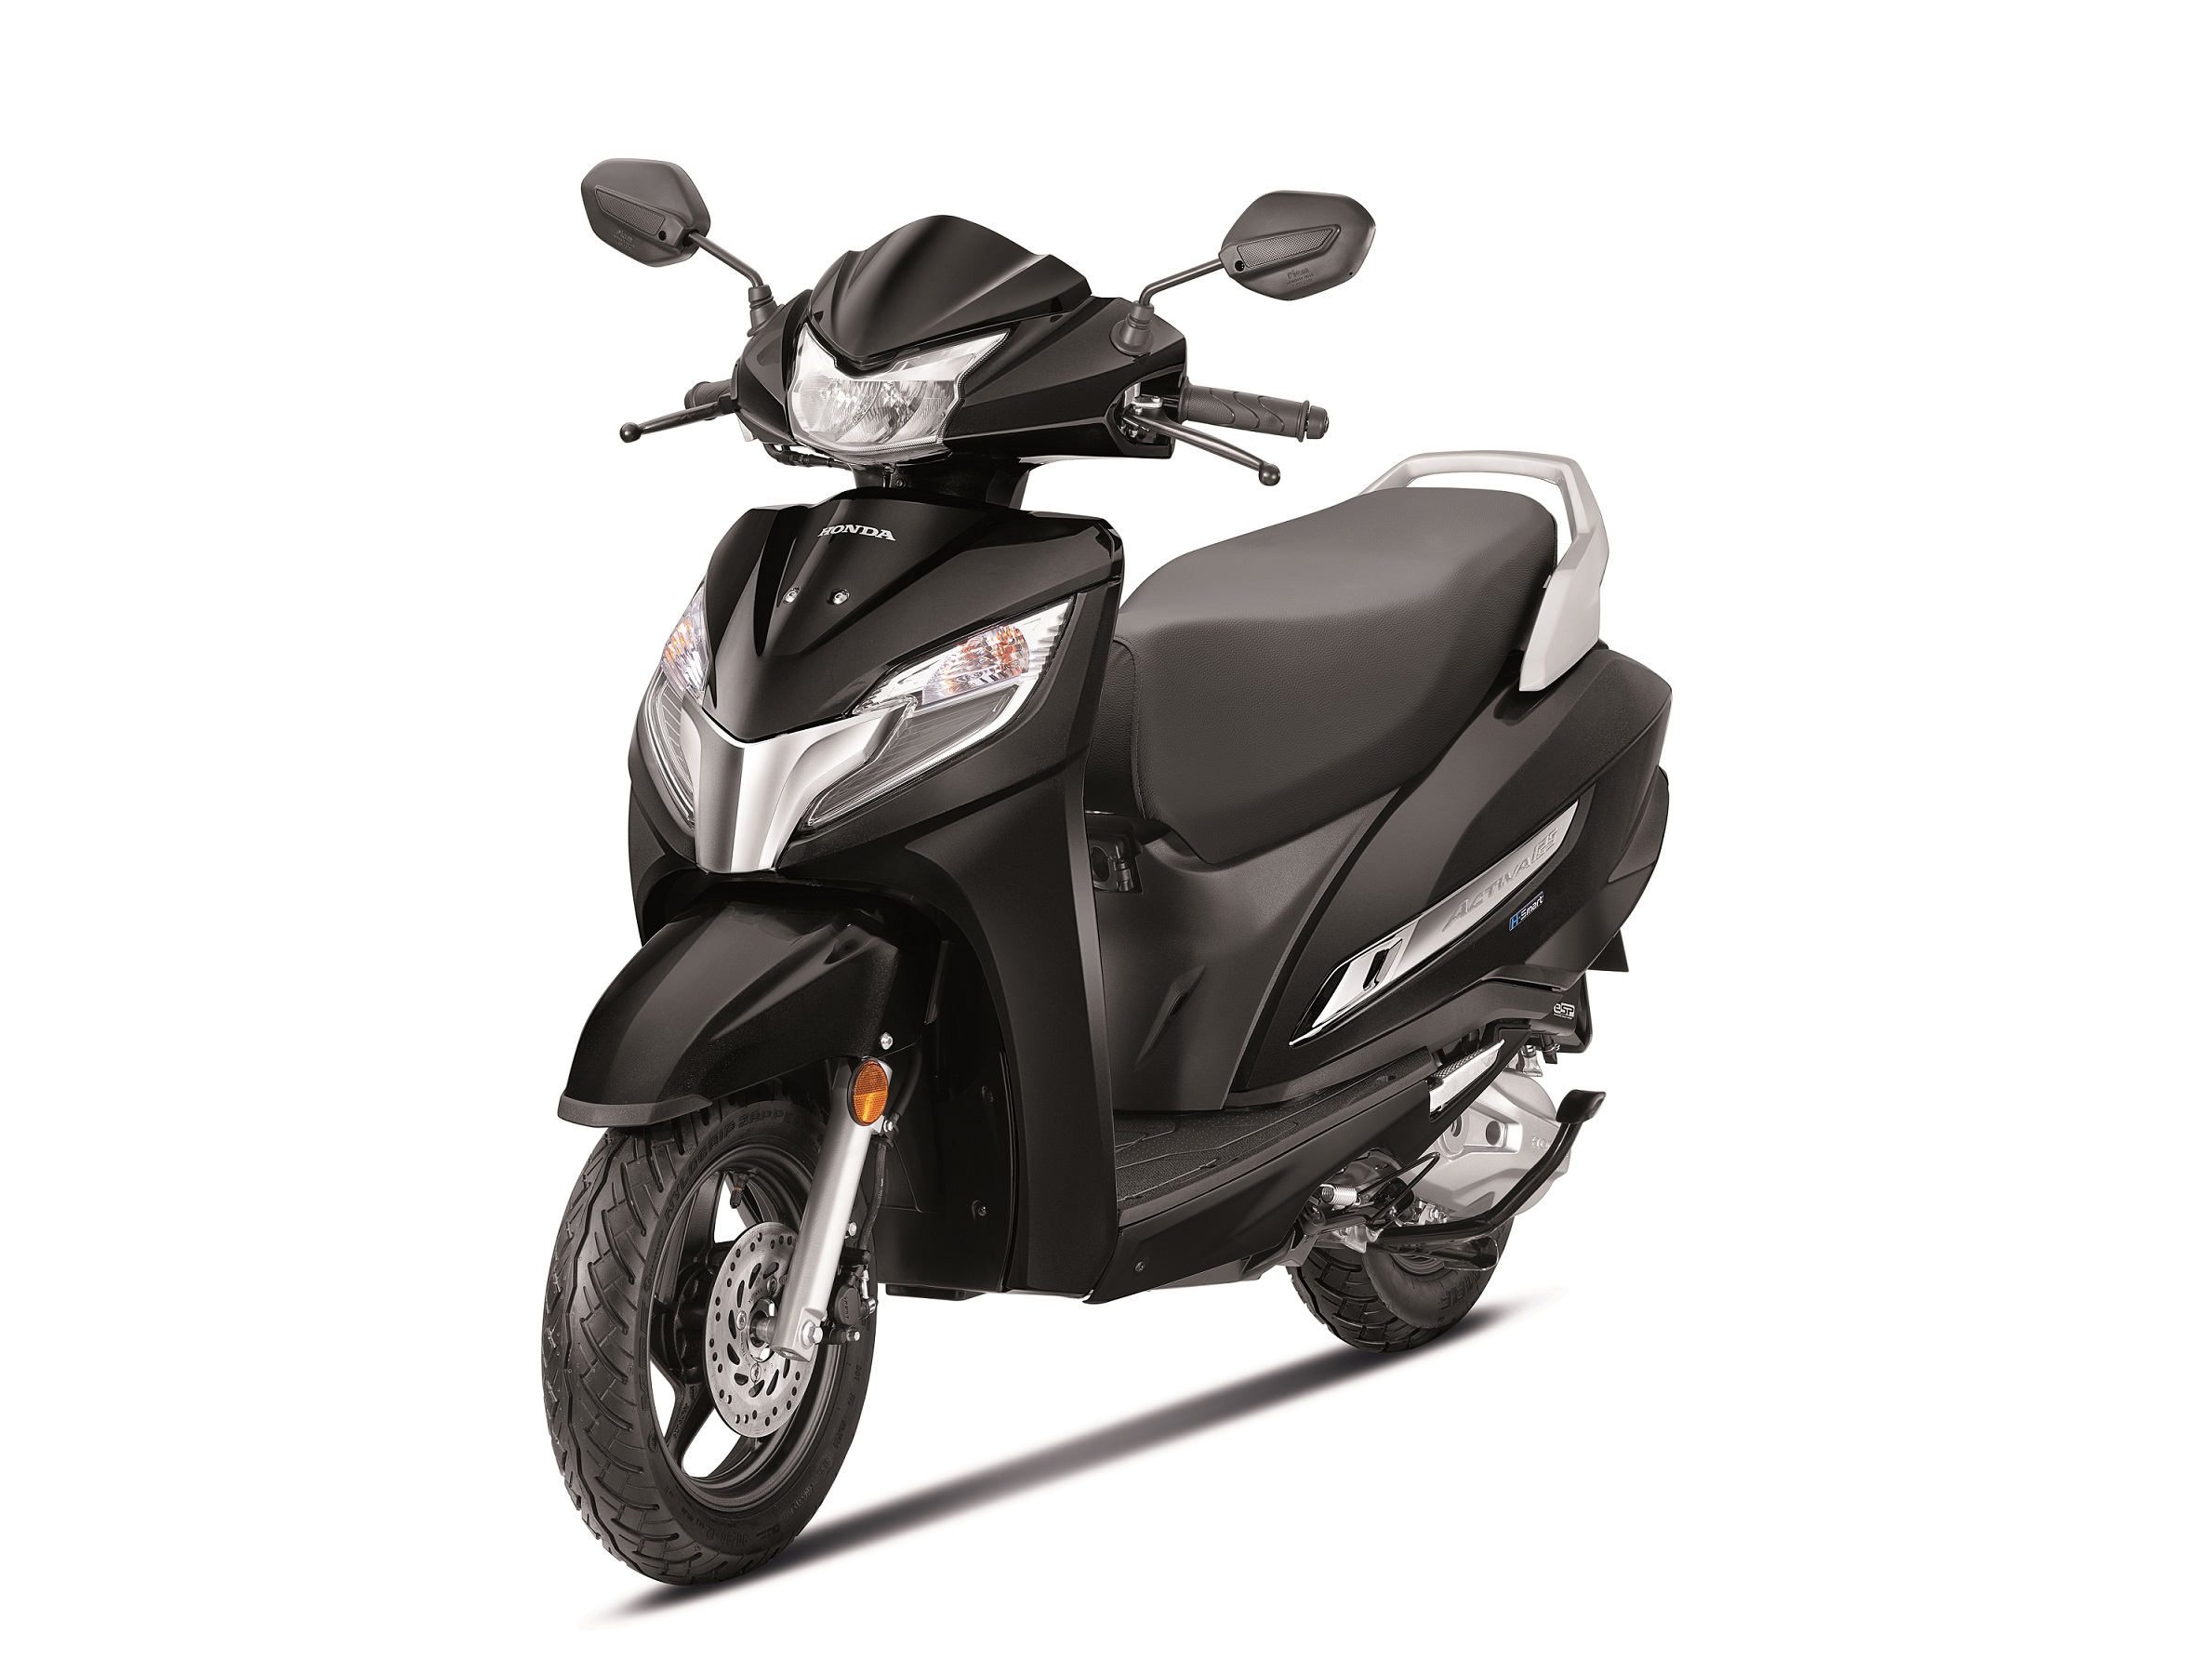 2023 Honda Activa 125 Launched With Smart Key And More (2)